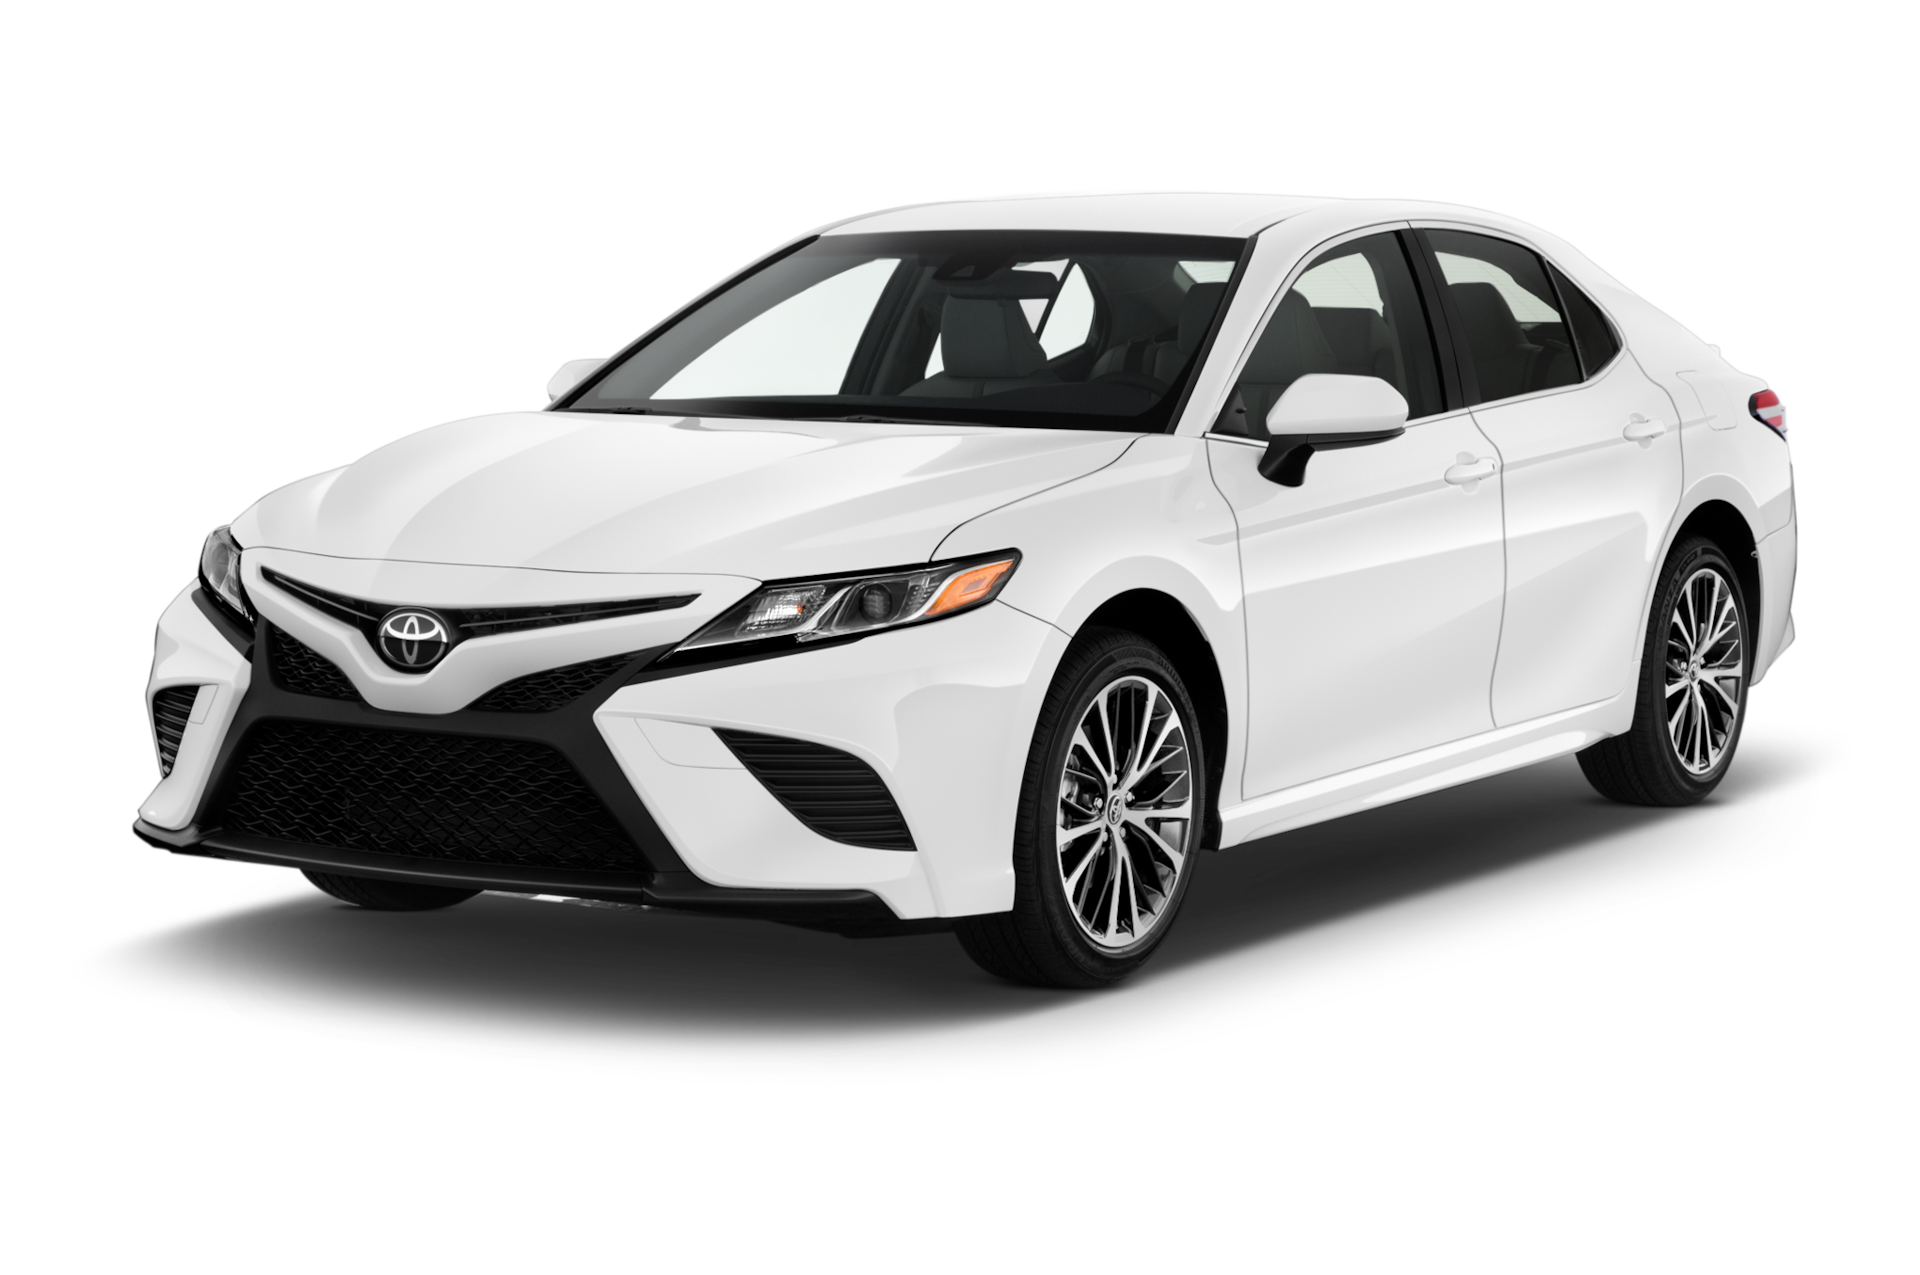 2020 Toyota Camry Prices, Reviews, and Photos - MotorTrend